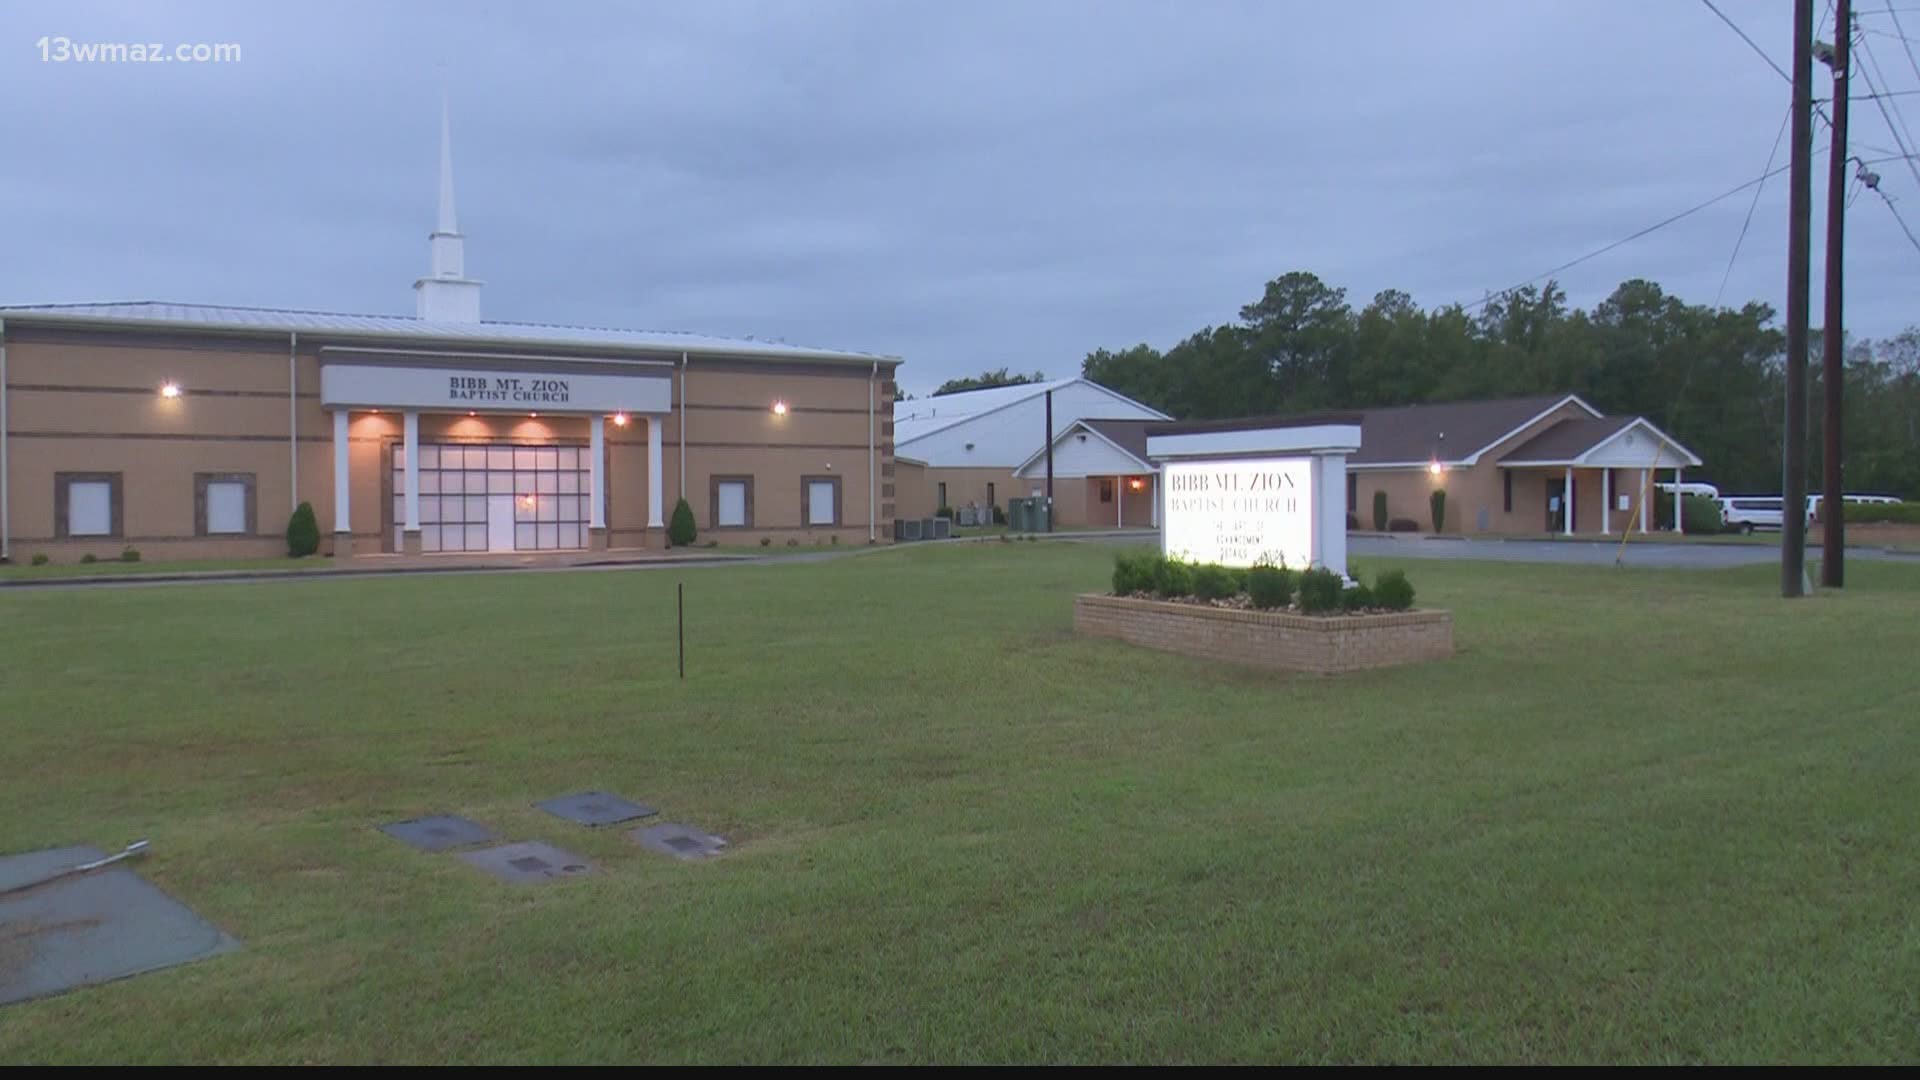 The Bibb Mount Zion Baptist Church has partnered with concerned clergy and the NAACP of Houston County for a voter registration drive and census outreach.